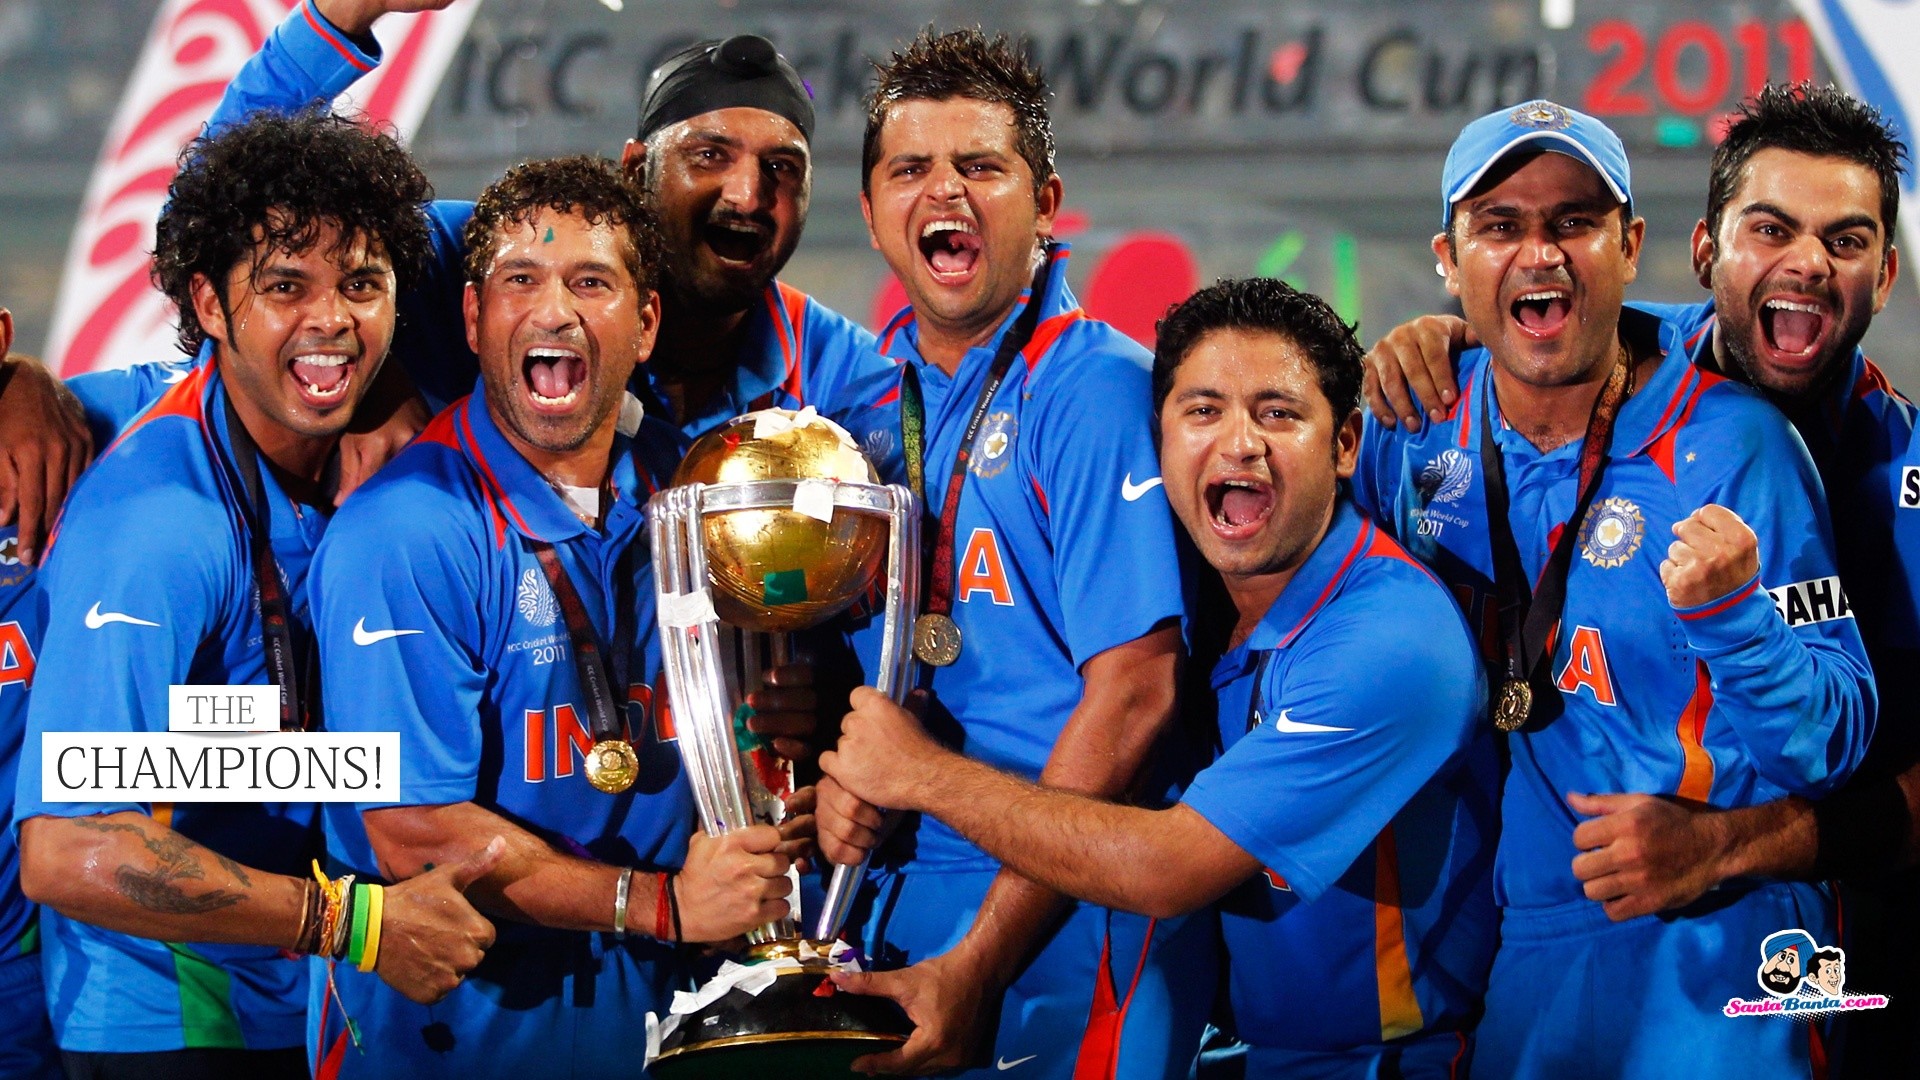 1920x1080 Team India 2011 World Cup